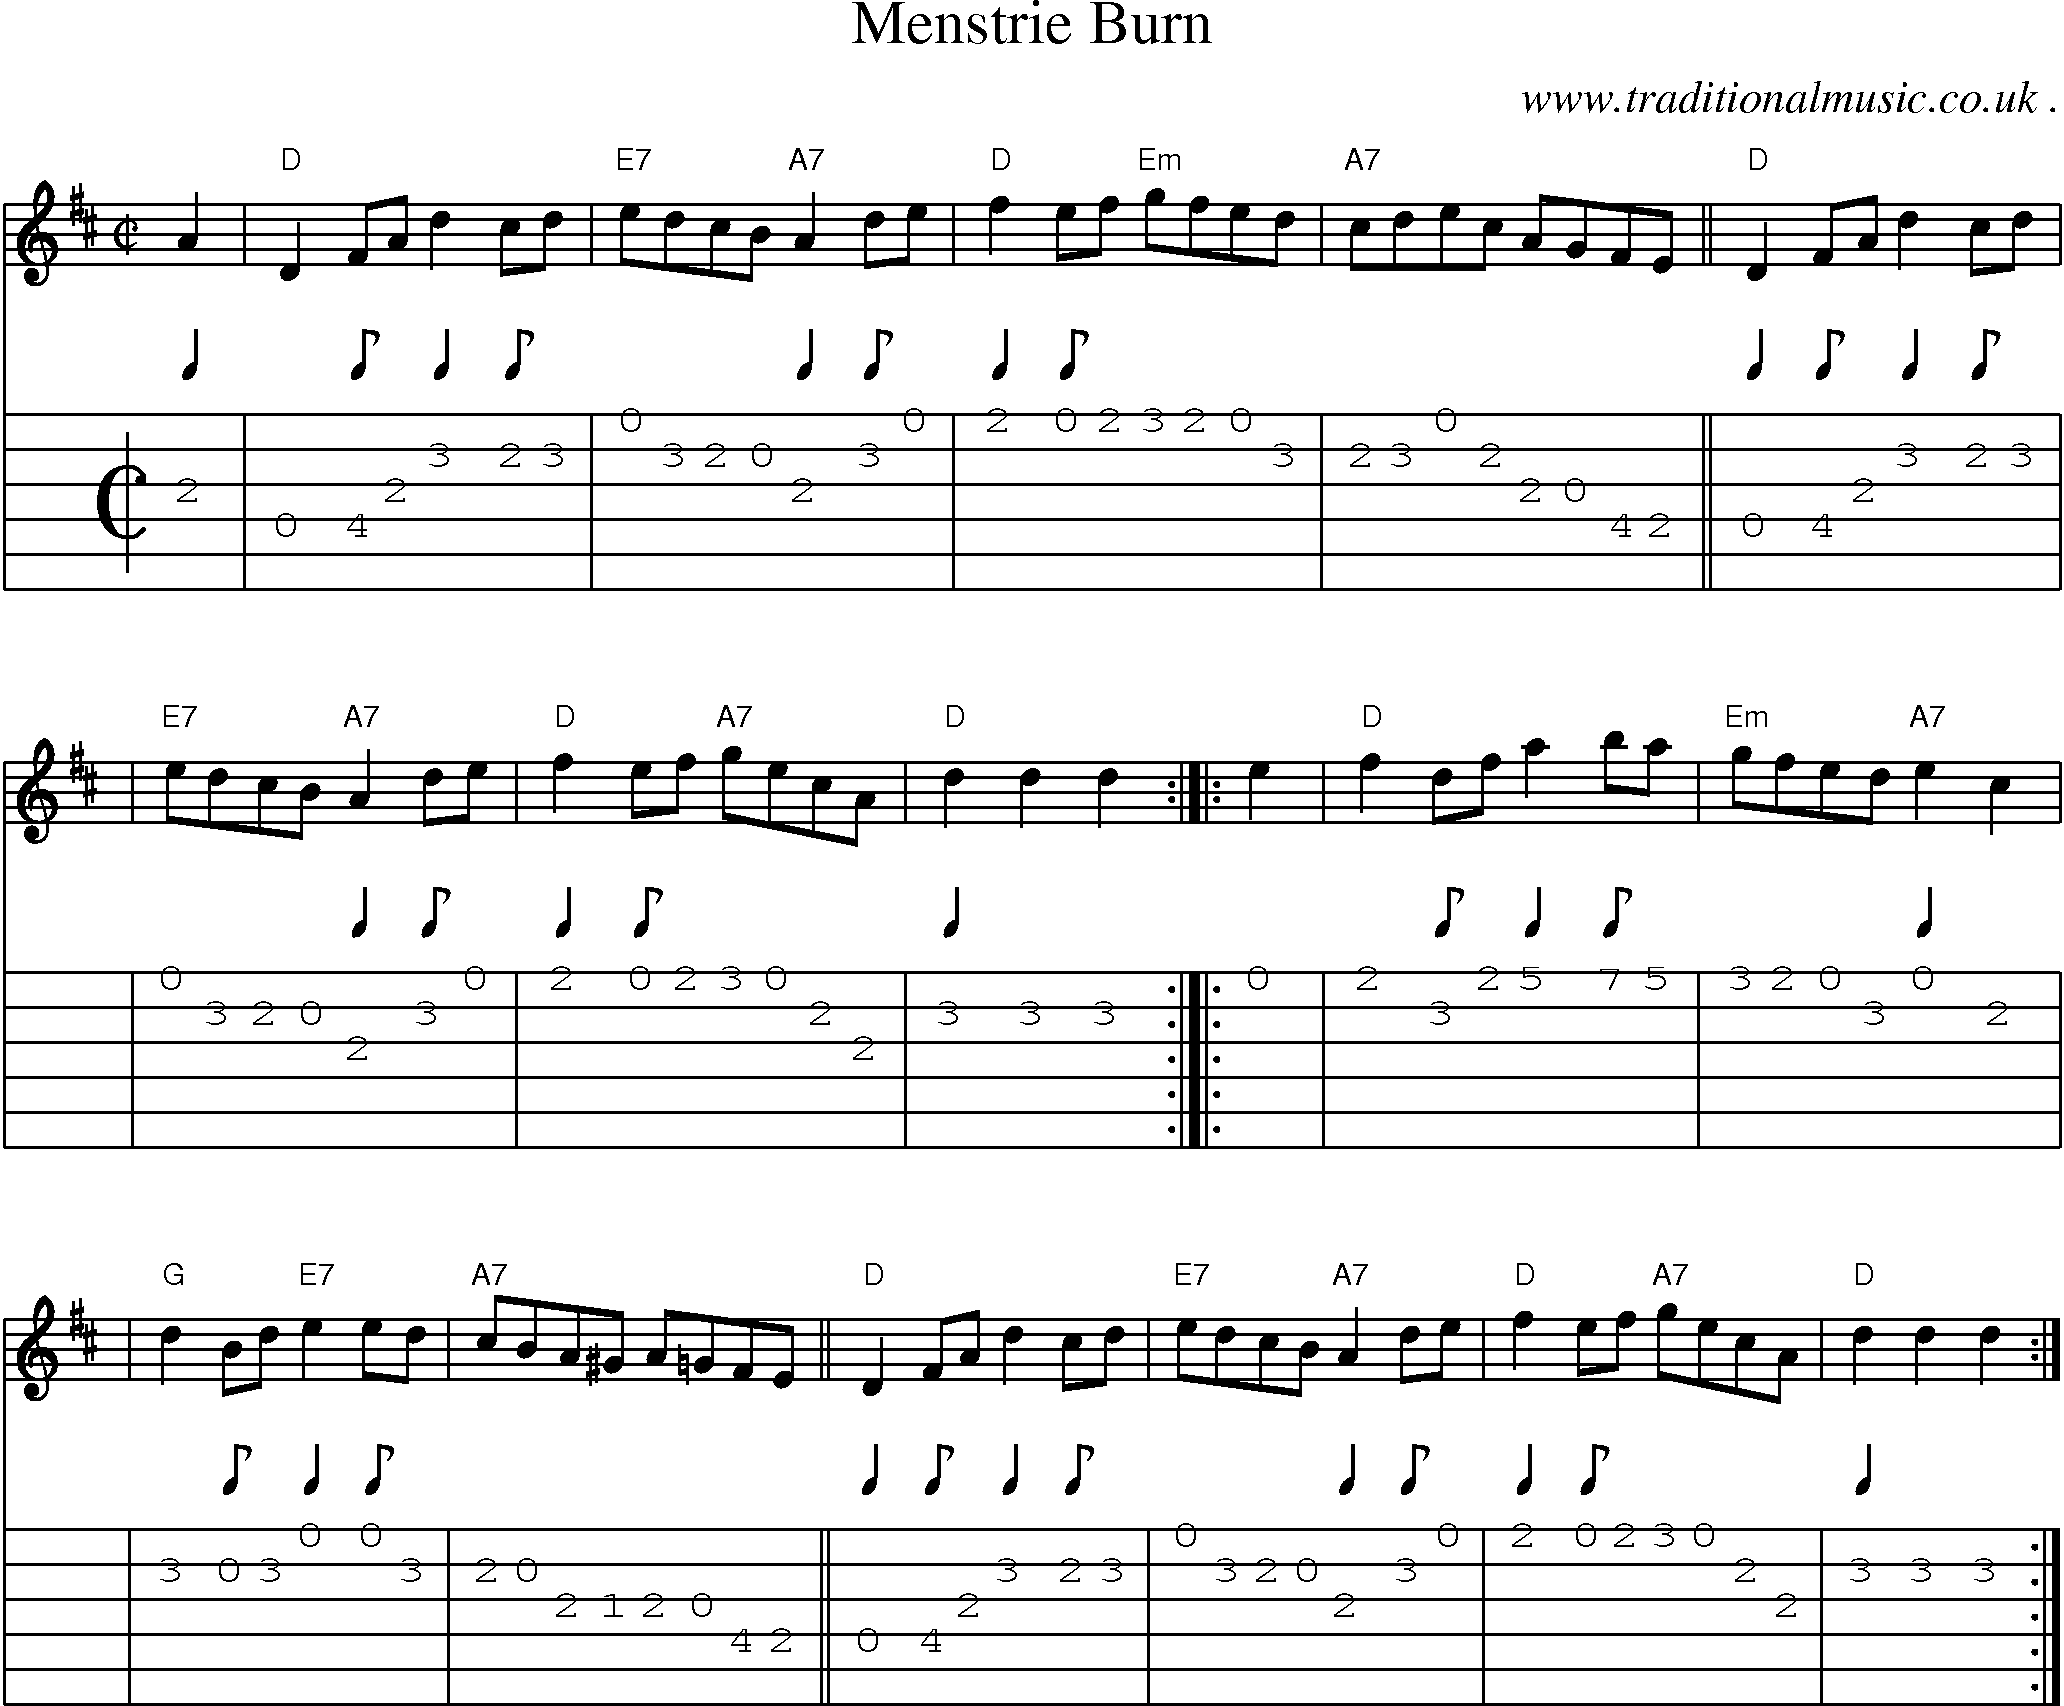 Sheet-music  score, Chords and Guitar Tabs for Menstrie Burn